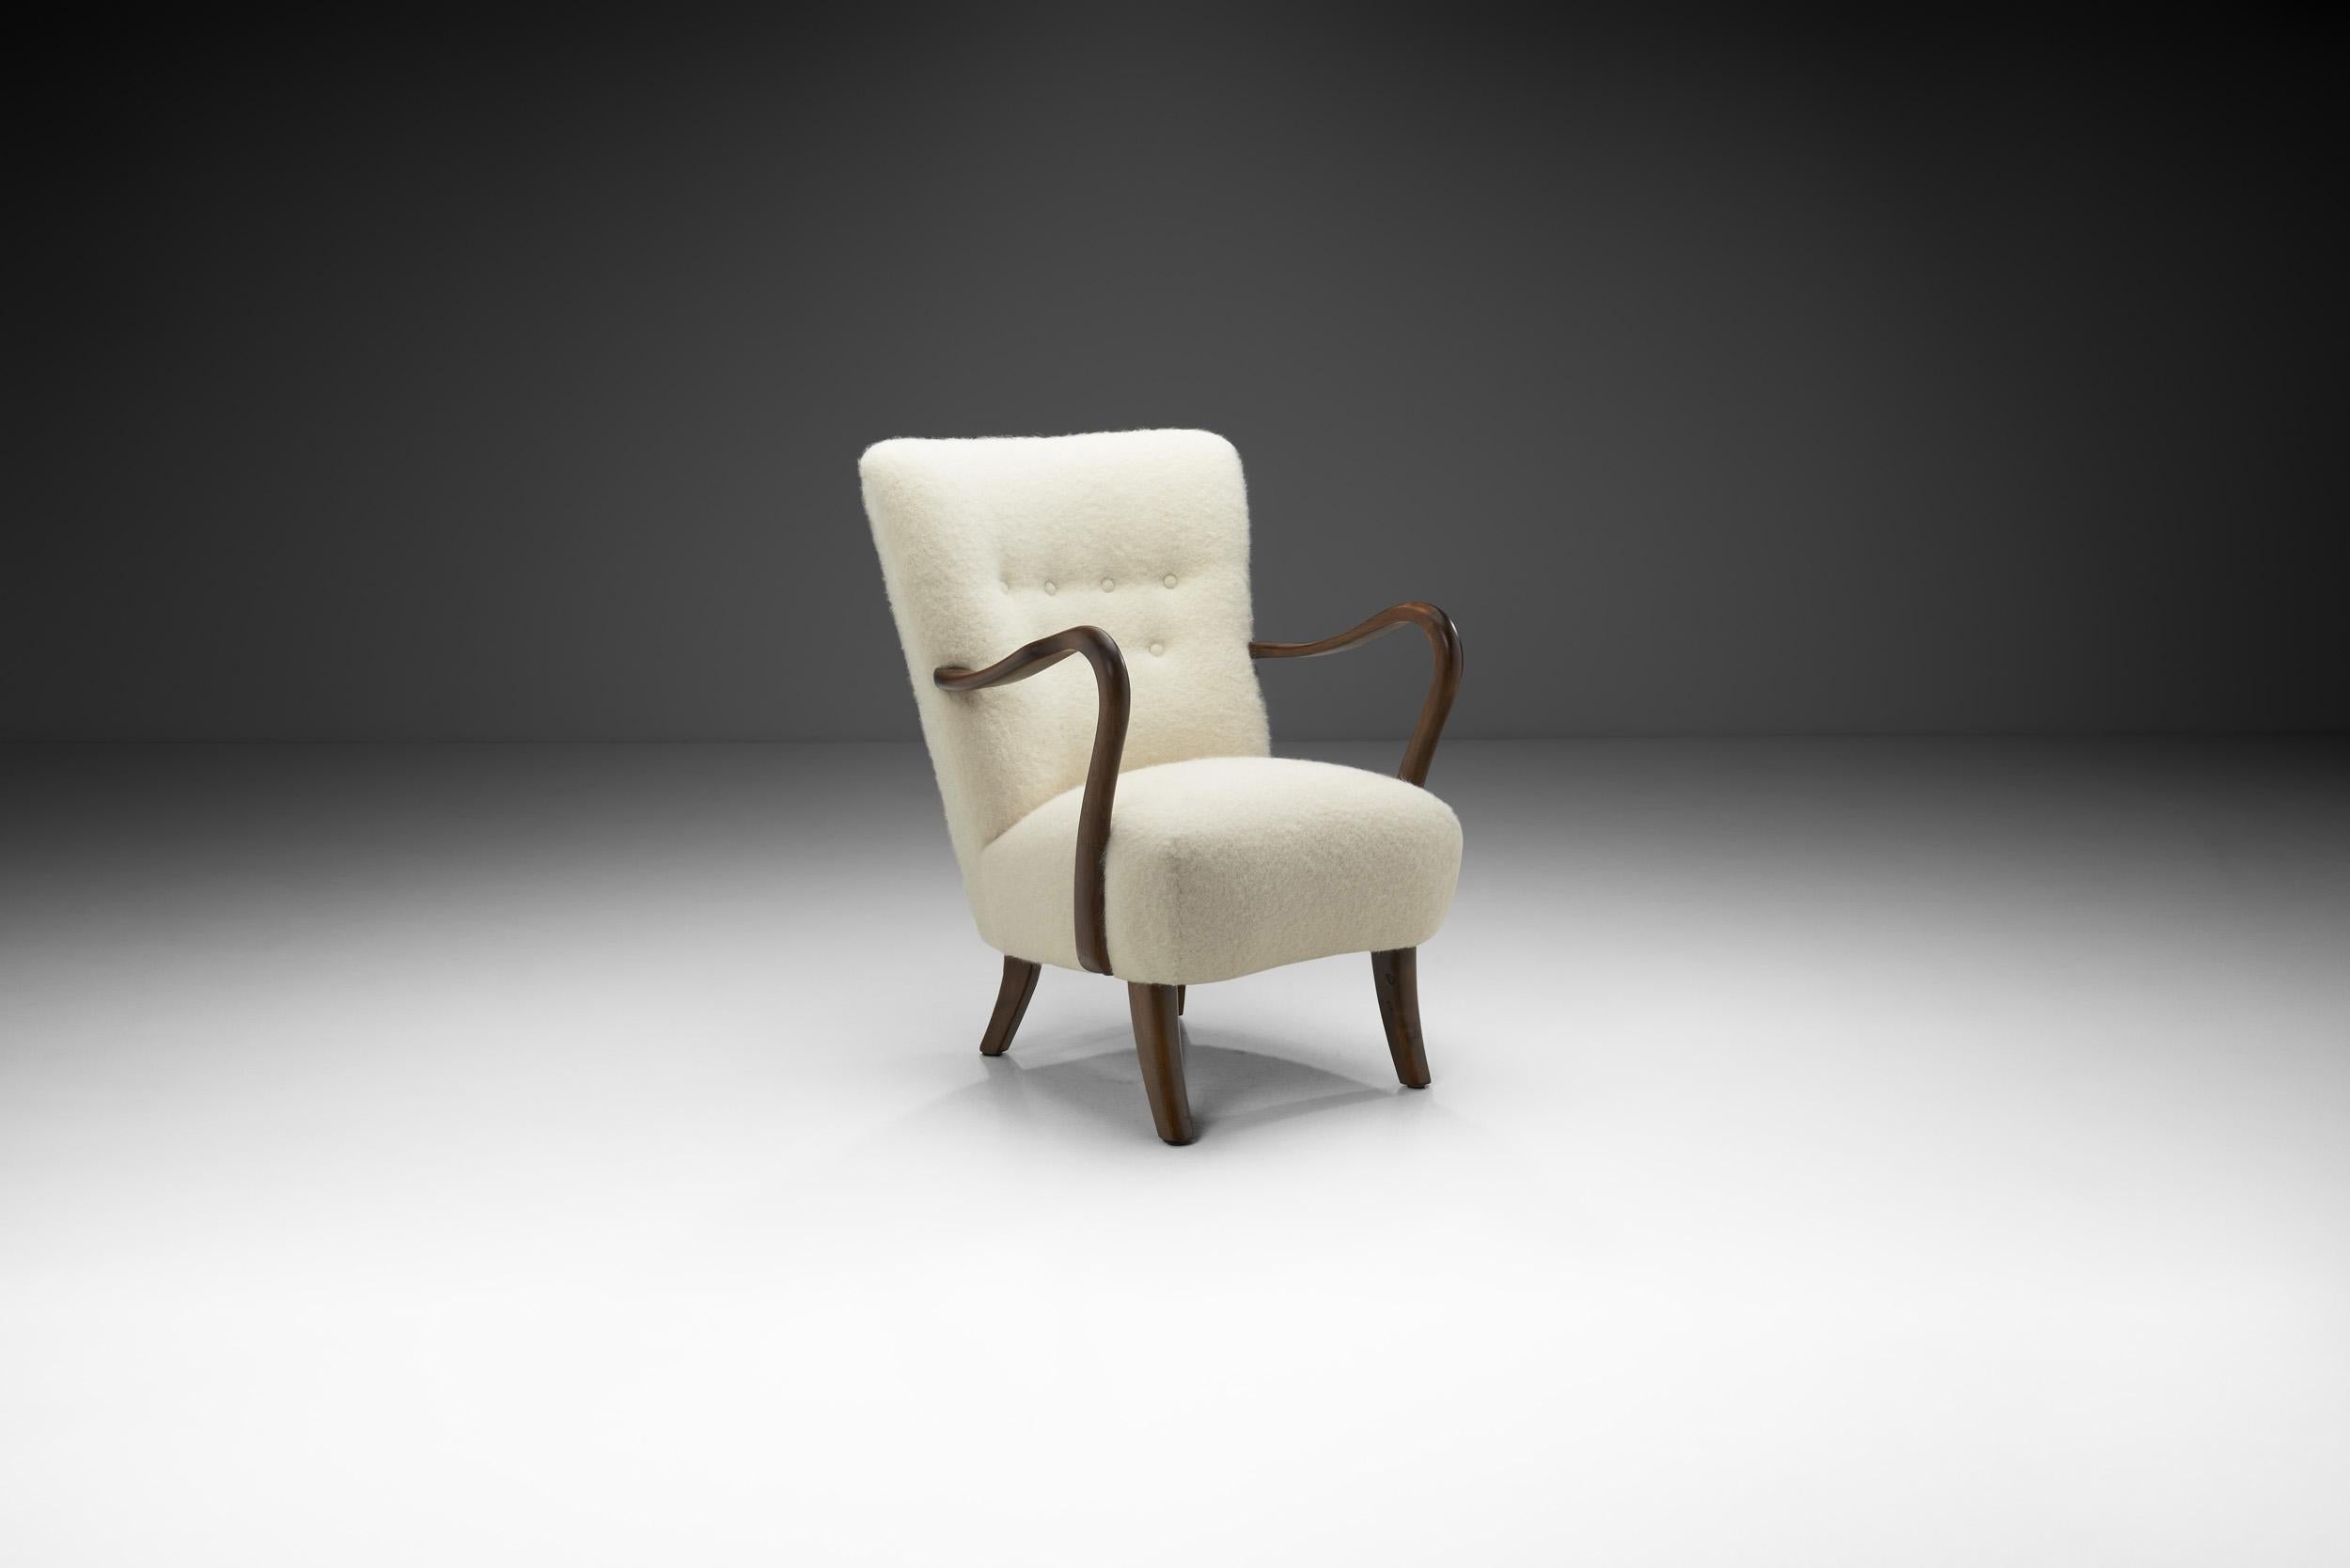 Danish Modern focused more on the aesthetics of modern design whilst employing the exquisite technique and material familiarity of highly skilled craftsmen known as cabinetmakers. Alfred Christensen’s present armchair in this style is a rare and